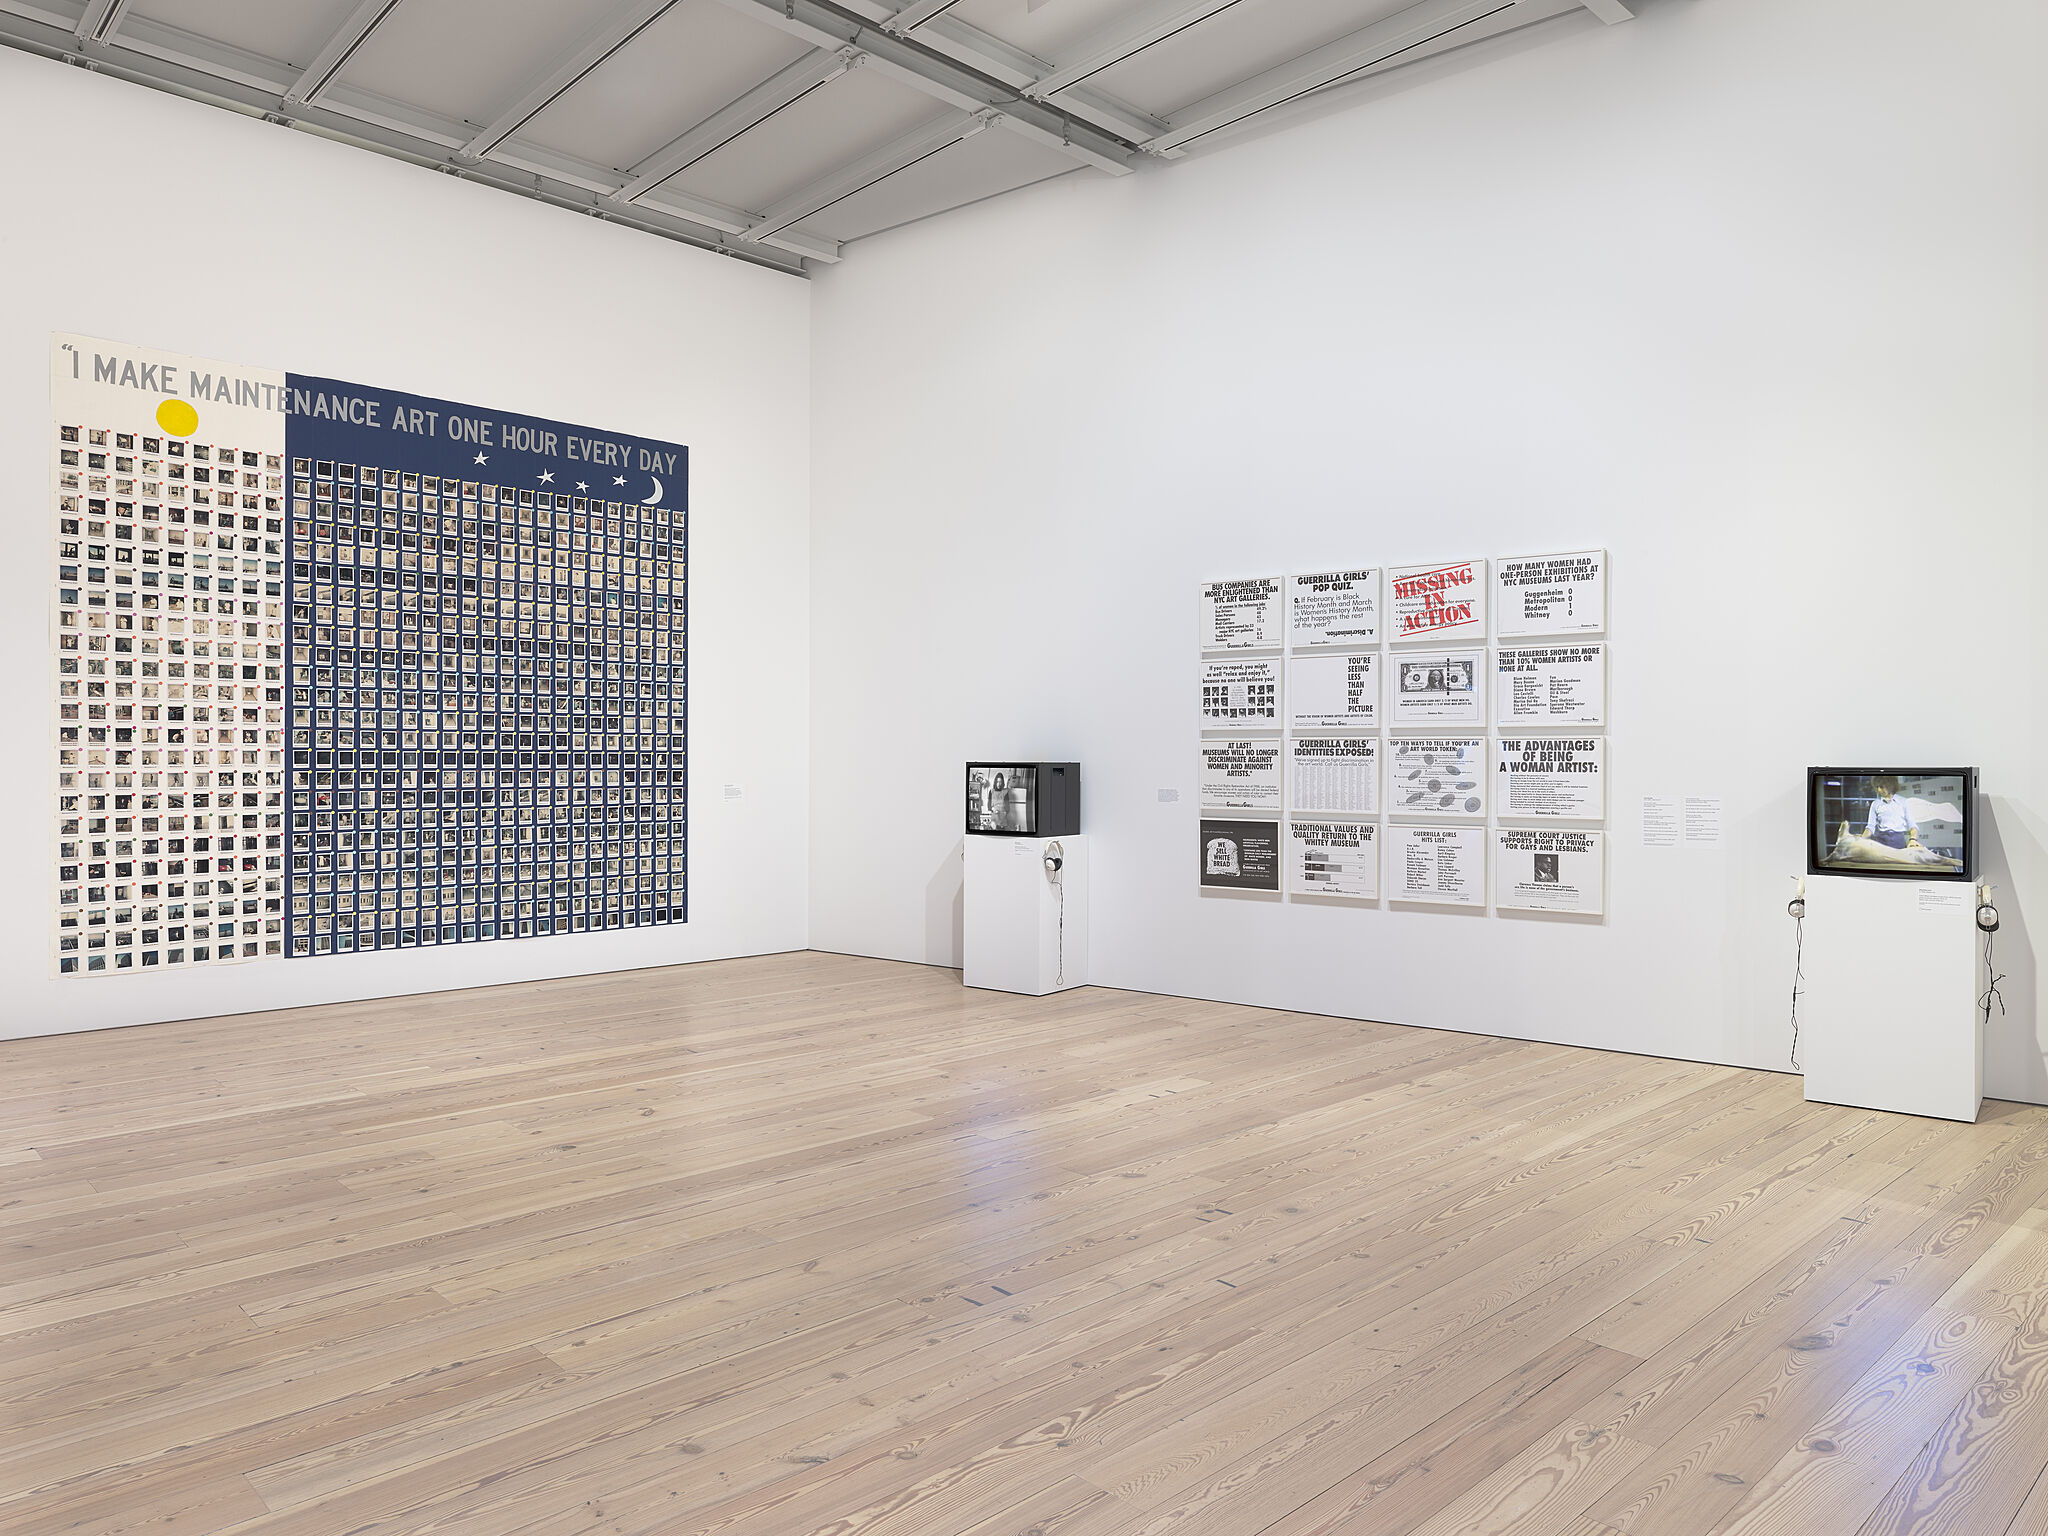 Installation view of An Incomplete History of Protest: Selections from the Whitney’s Collection, 1940-2017 